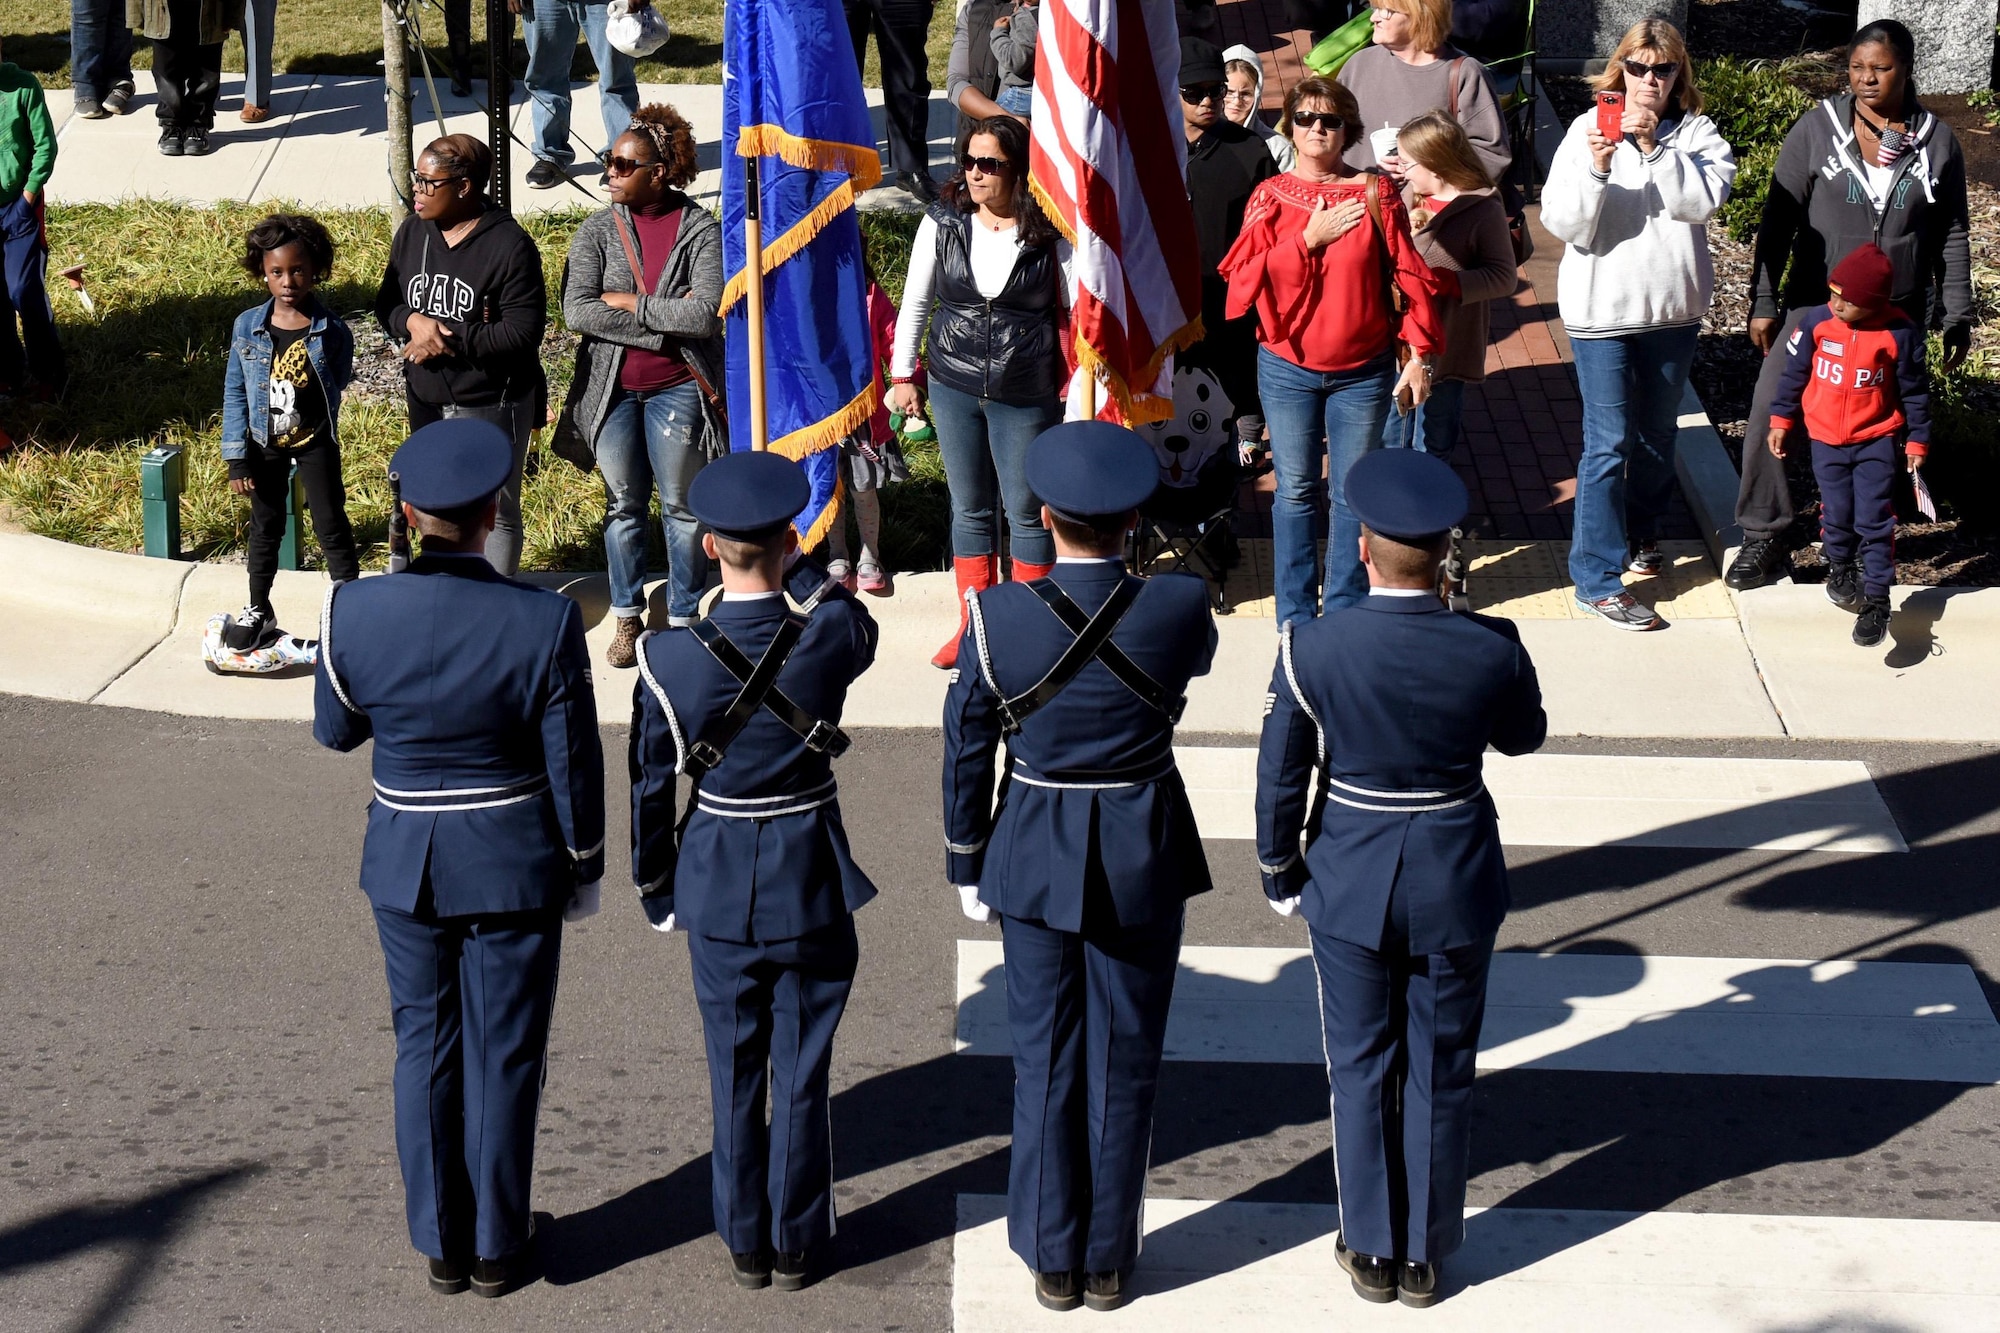 The annual Wayne County Veterans Day parade kicked off, Nov. 11, 2016, in Downtown Goldsboro, North Carolina to honor all who have served our country, past and present. More than 220 Airman from Seymour Johnson Air Force Base, North Carolina marched in the parade attended by about 8,000 people. (U.S. Air Force photo by Airman Miranda A. Loera)